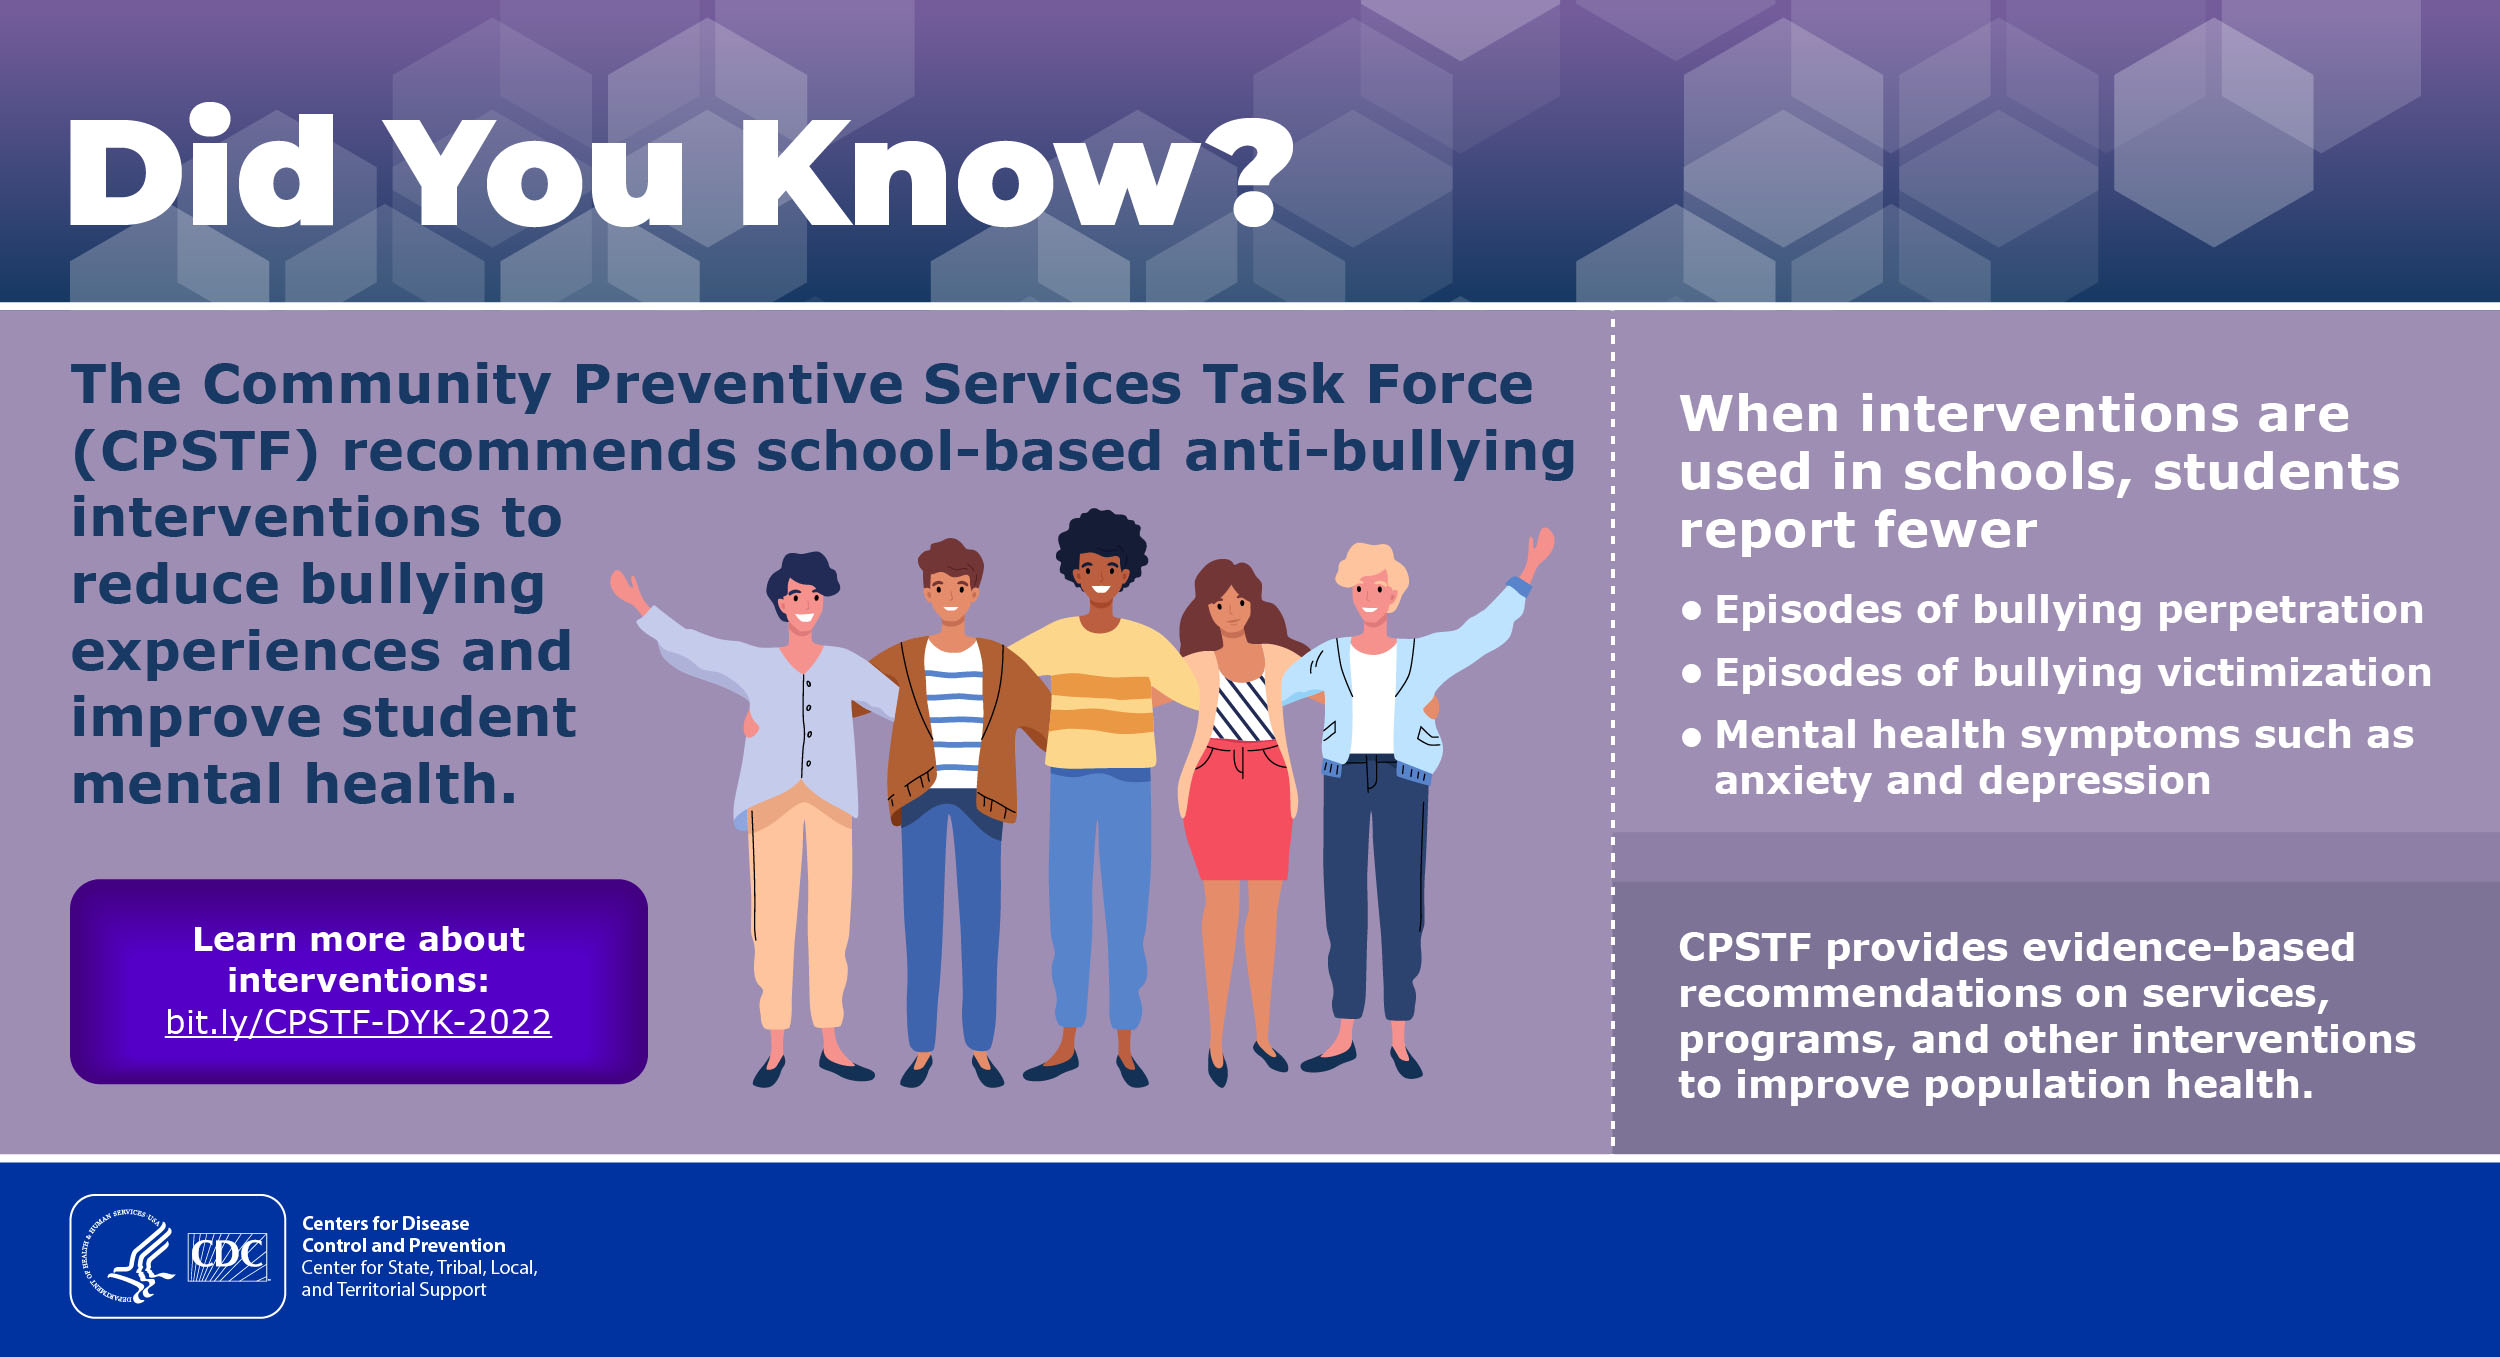 Did You Know? The Community Preventive Services Task Force (CPSTF) recommends school-based anti-bullying interventions to reduce bullying experiences and improve student mental health. When interventions are used in schools, students report fewer episodes of bullying perpetration, episodes of bullying victimization, and mental health symptoms such as anxiety and depression. Learn more about interventions: bit.ly/CPSTF-DYK-2022. CPSTF provides evidence-based recommendations on services, programs, and other interventions to improve population health.